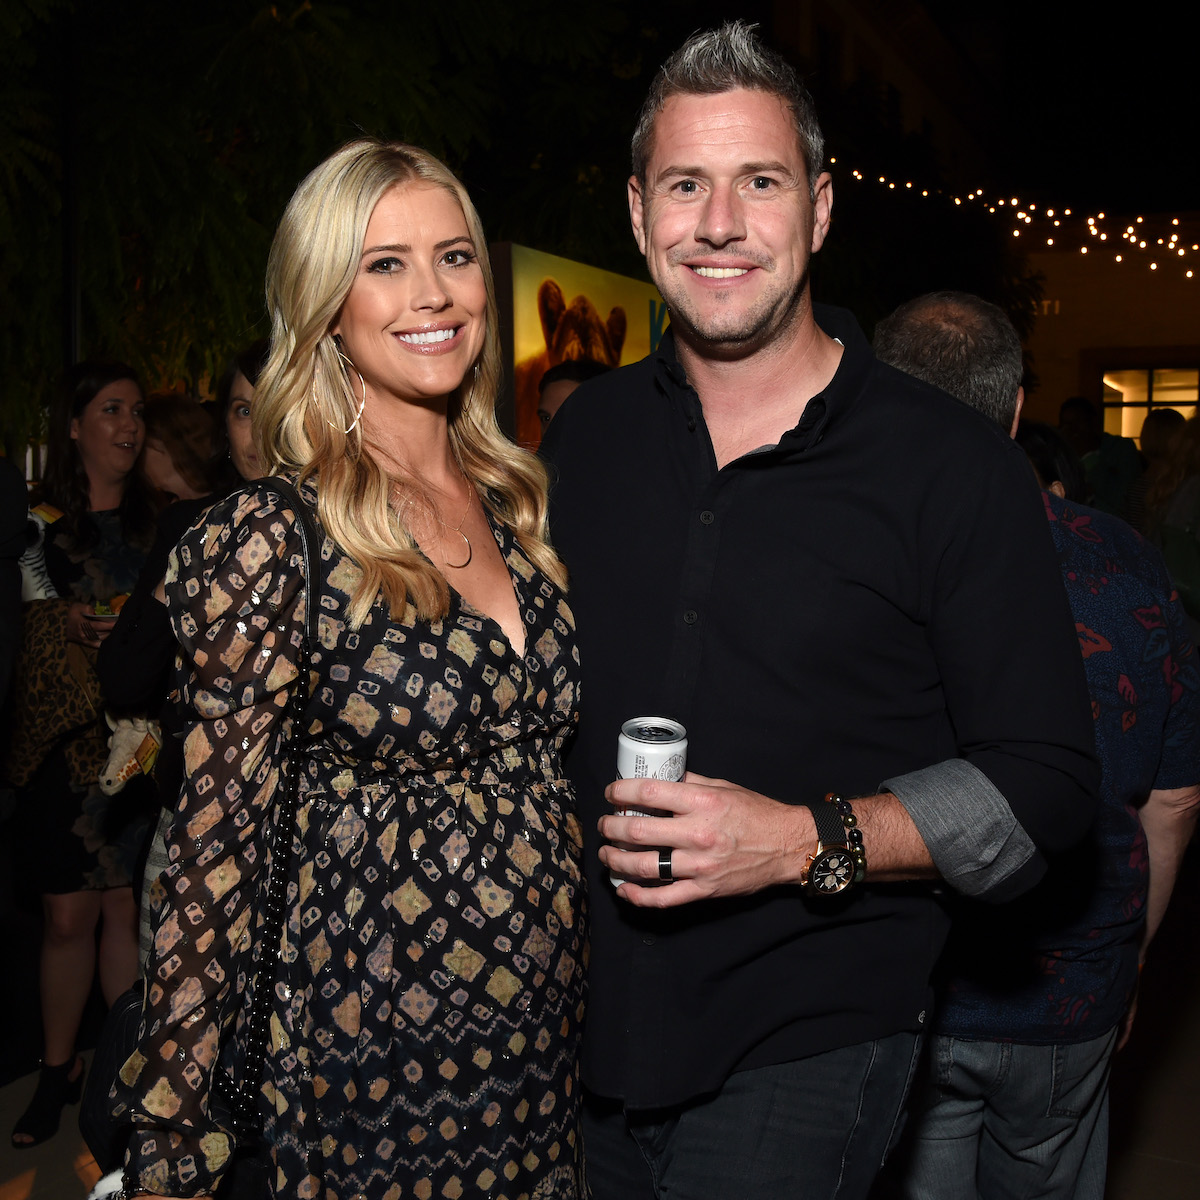 Christina Haack and Ant Anstead smile and pose together at an event.